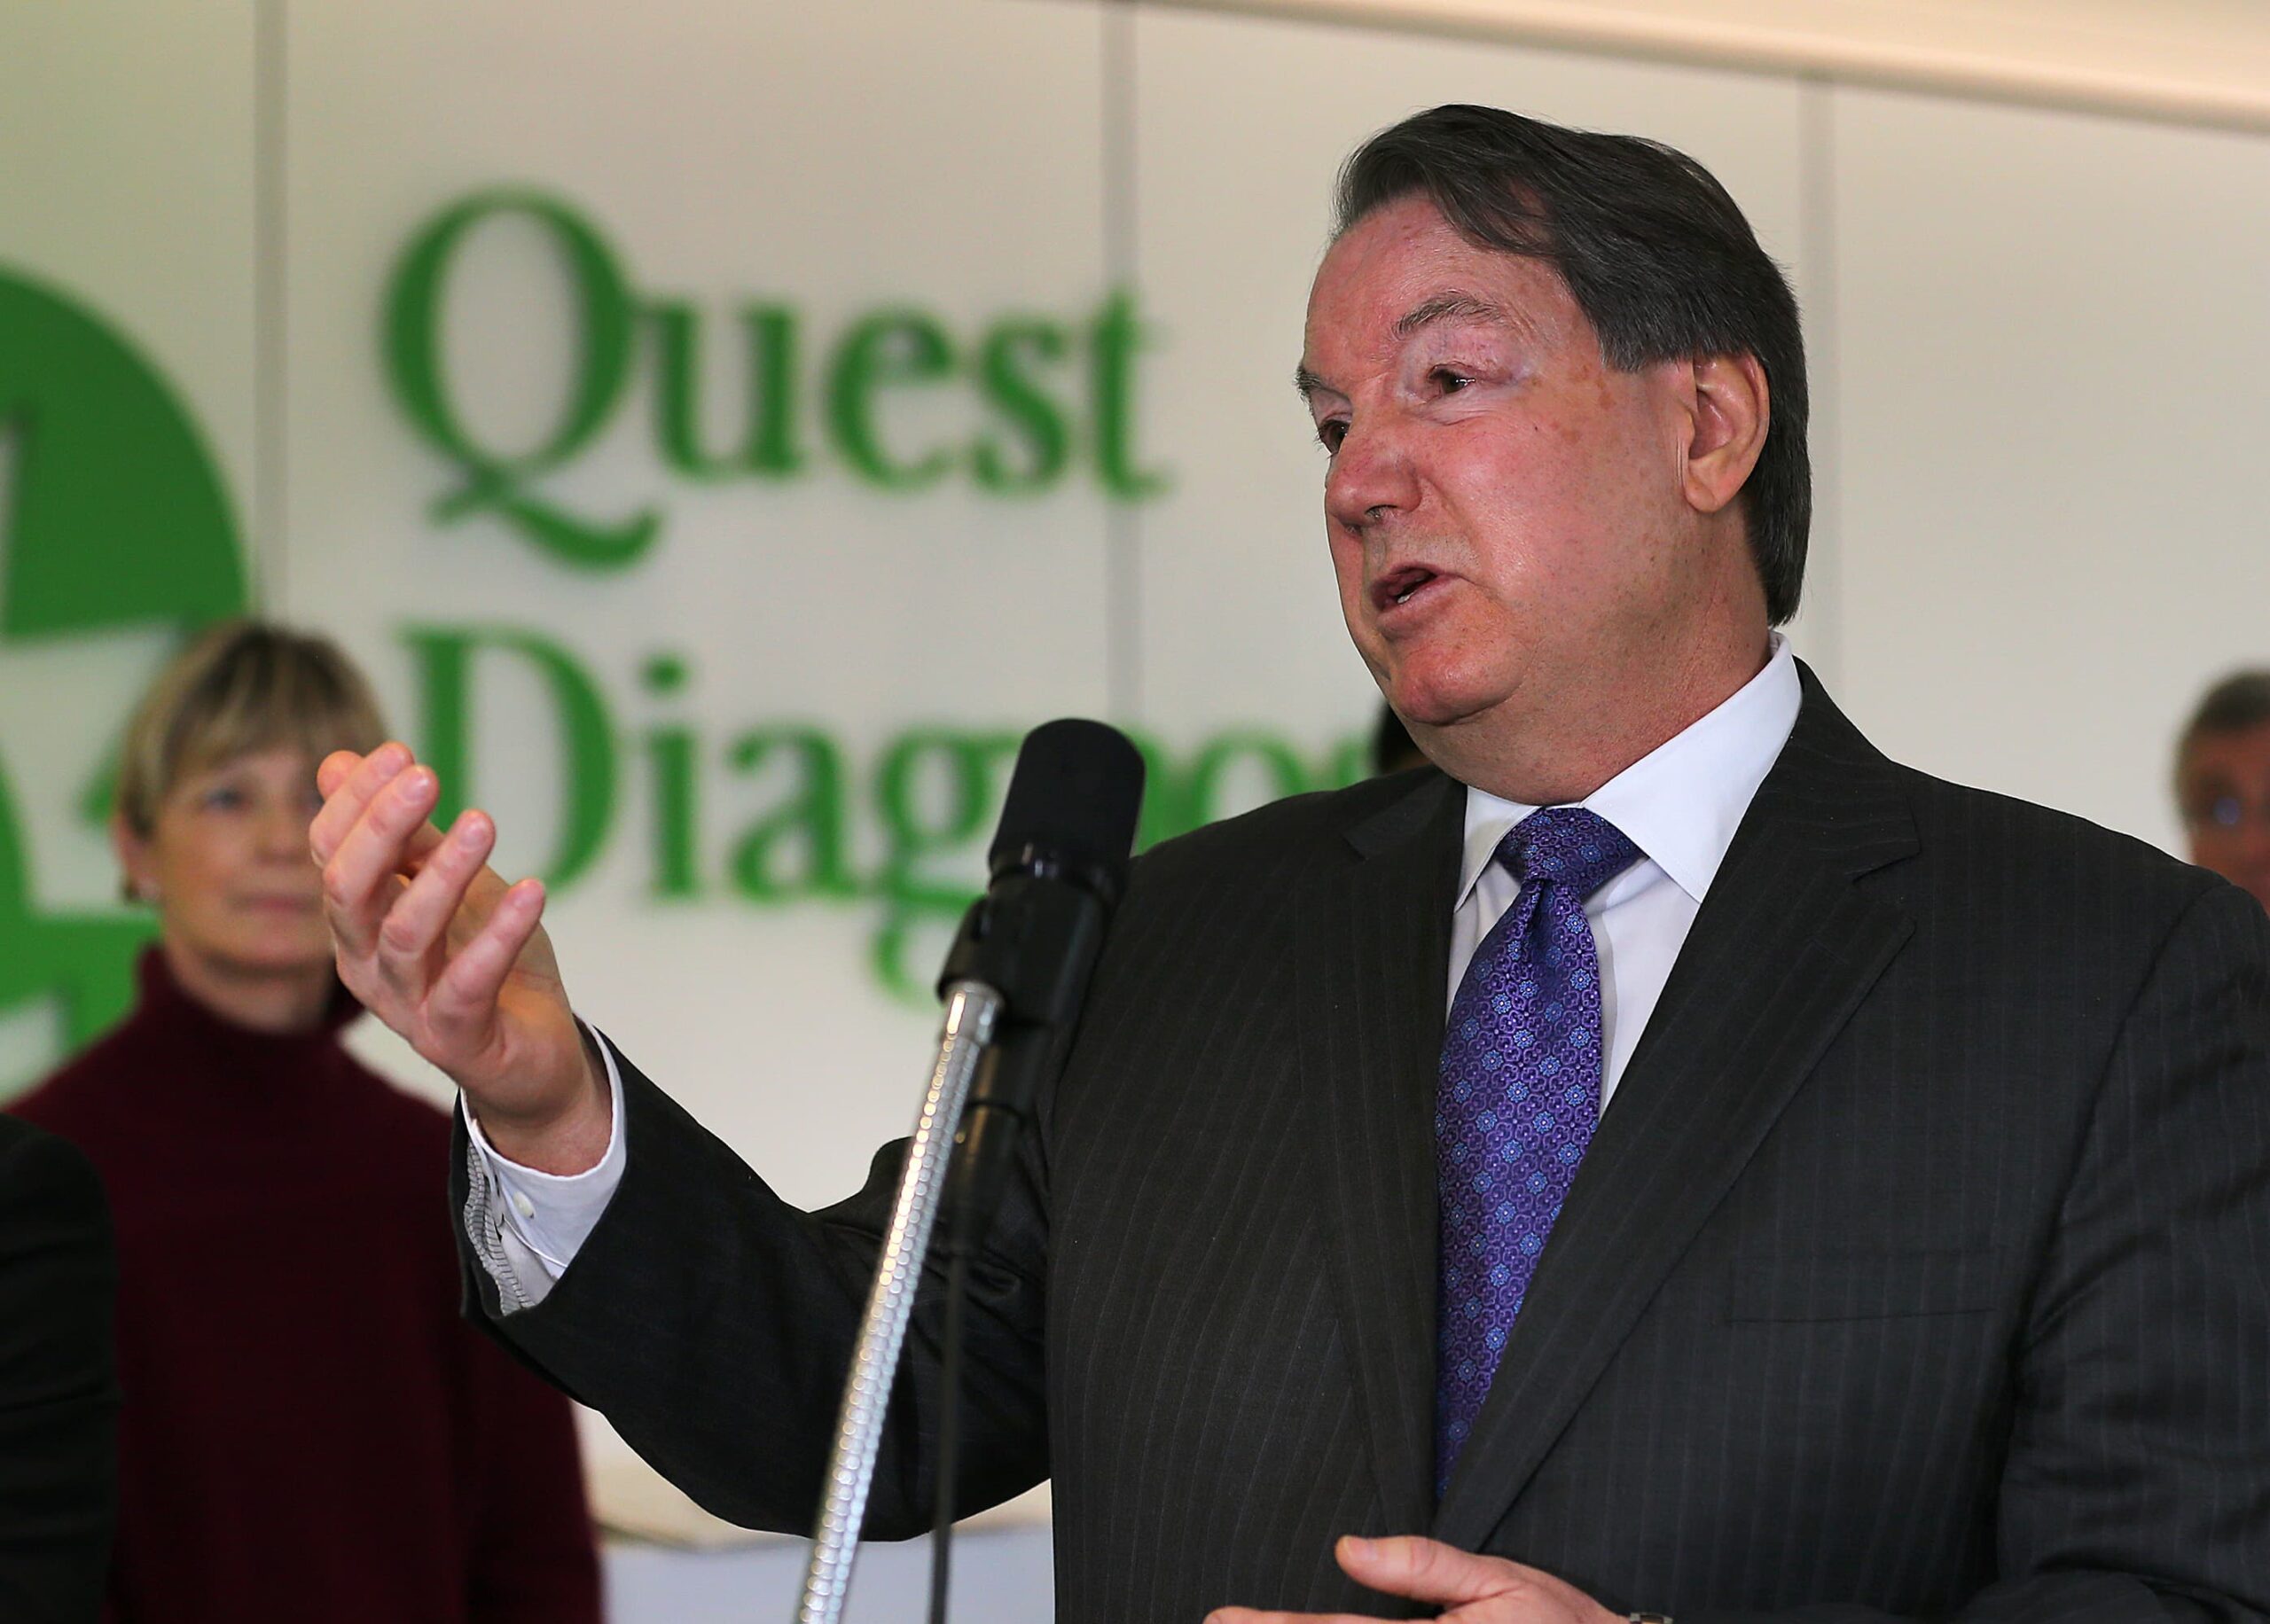 Quest Diagnostics is seeing an increase in Covid checks as delta variant spreads, CEO says